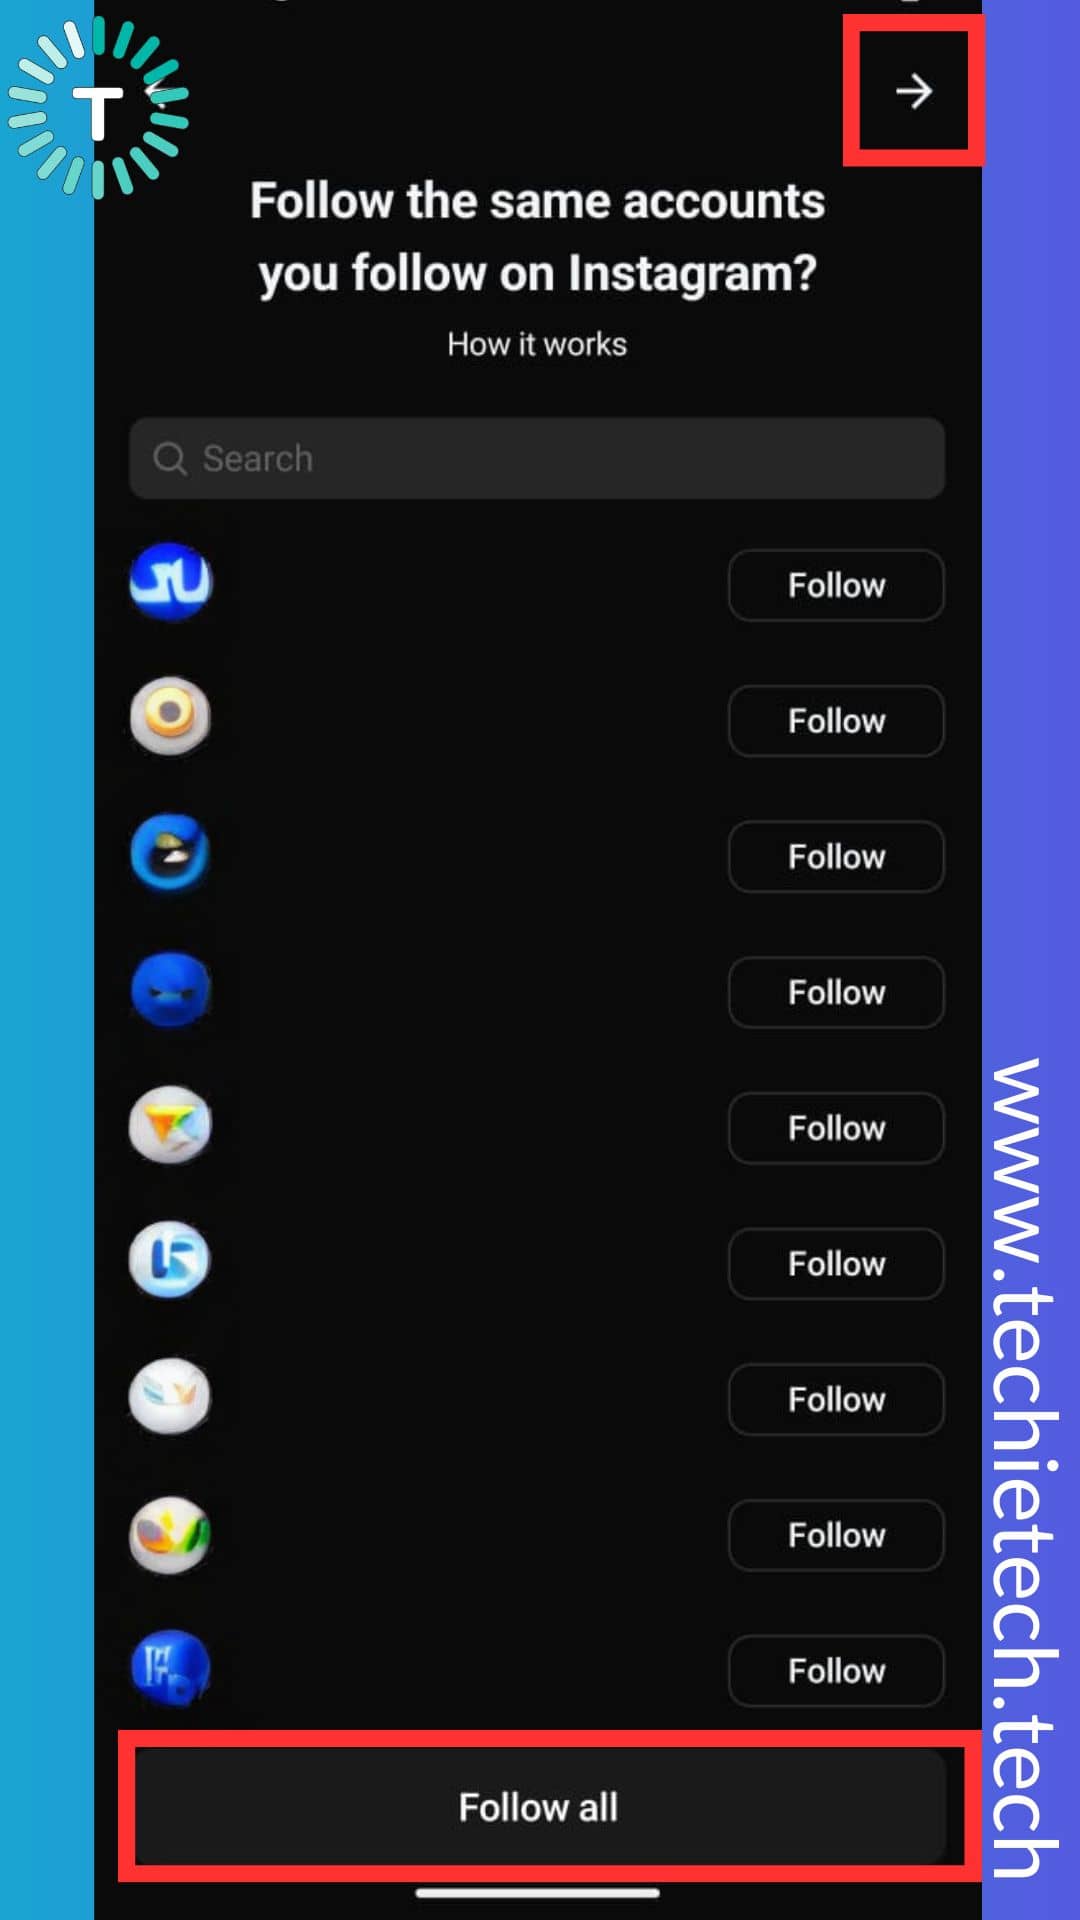 Tap Follow all or tap arrow at top right